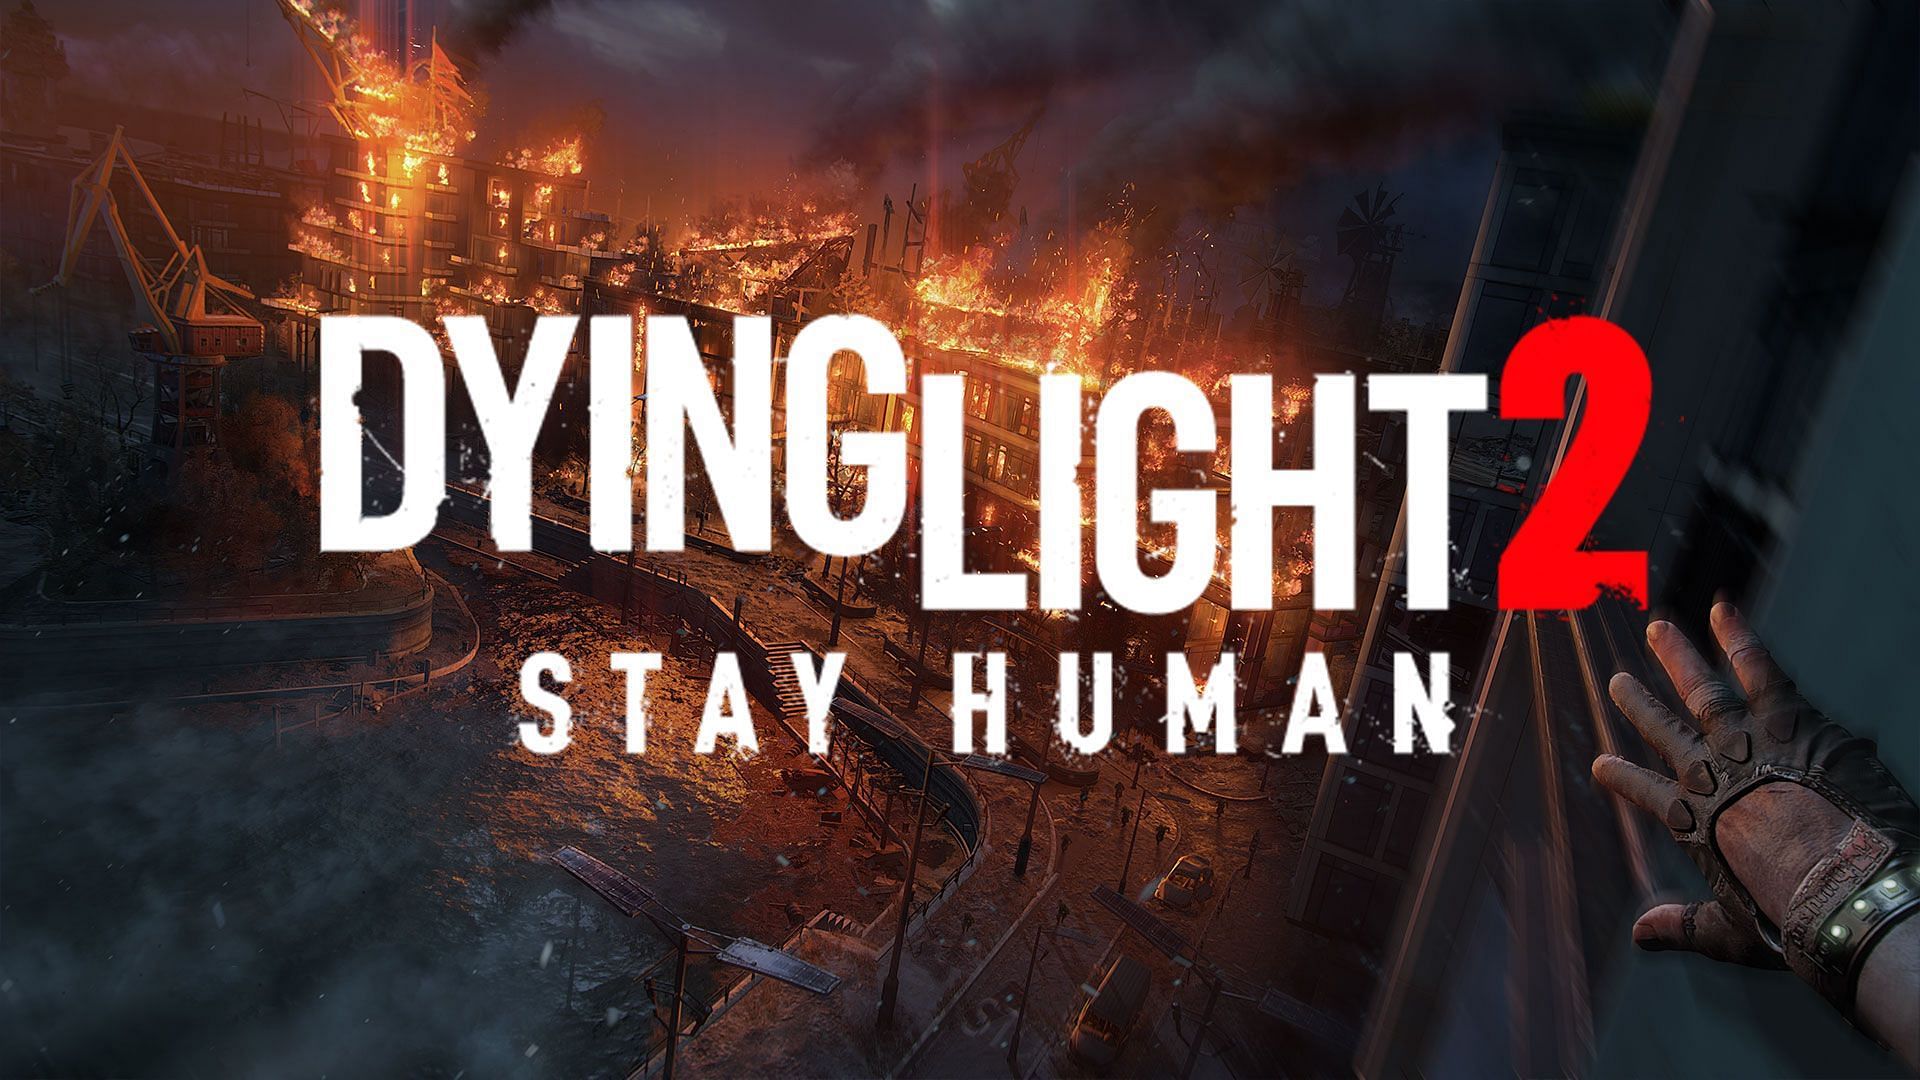 Dying Light 2 Update 1.0.7 Patch Notes (Official) - February 16, 2022